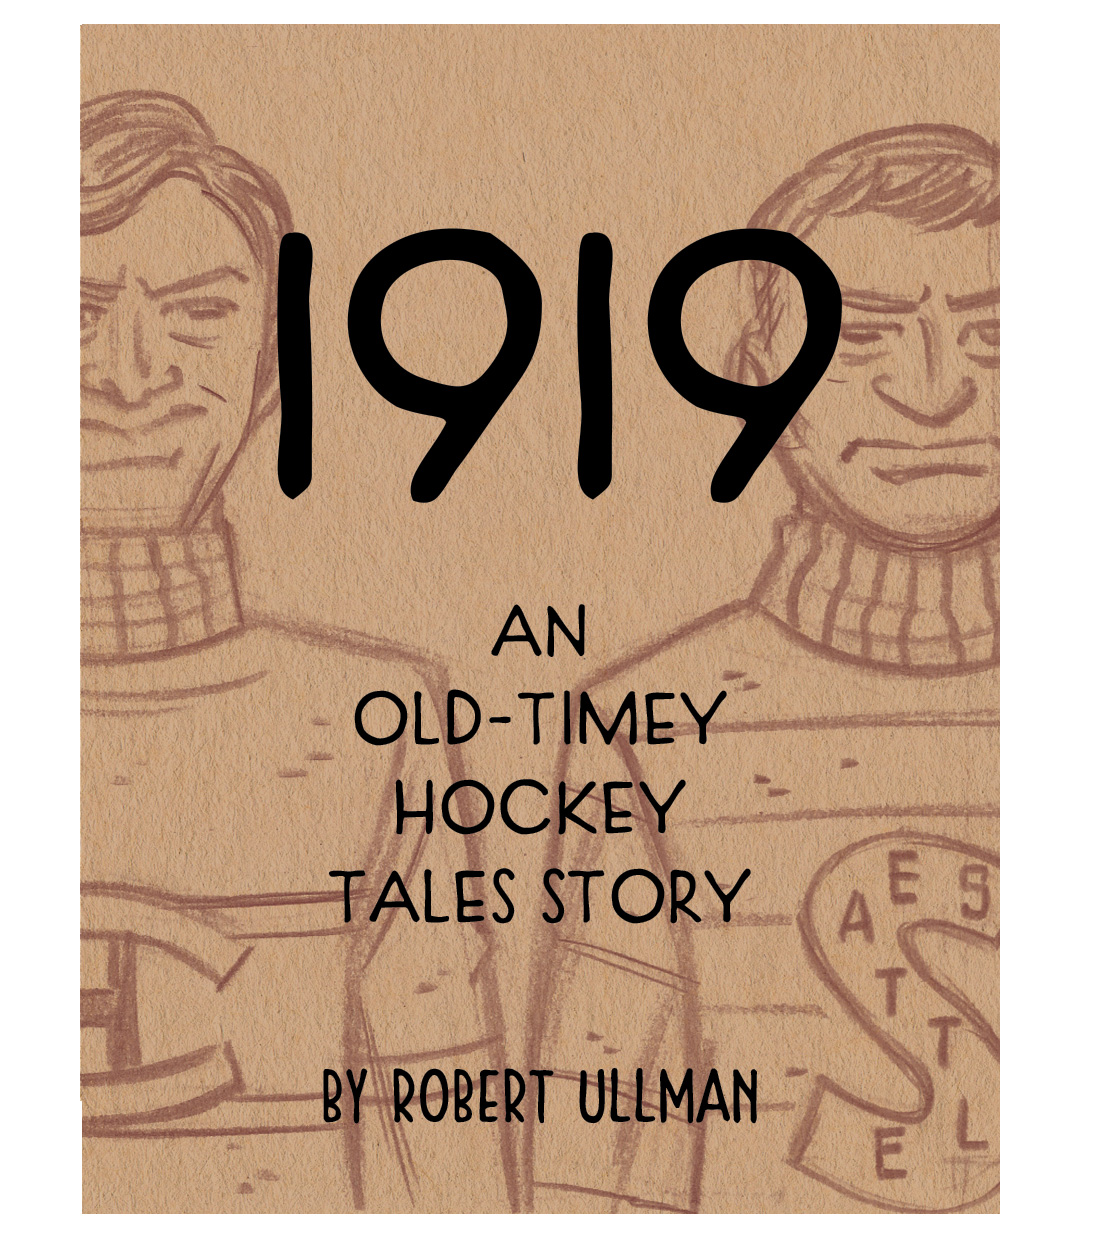 1919: An Old-Timey Hockey Tales story